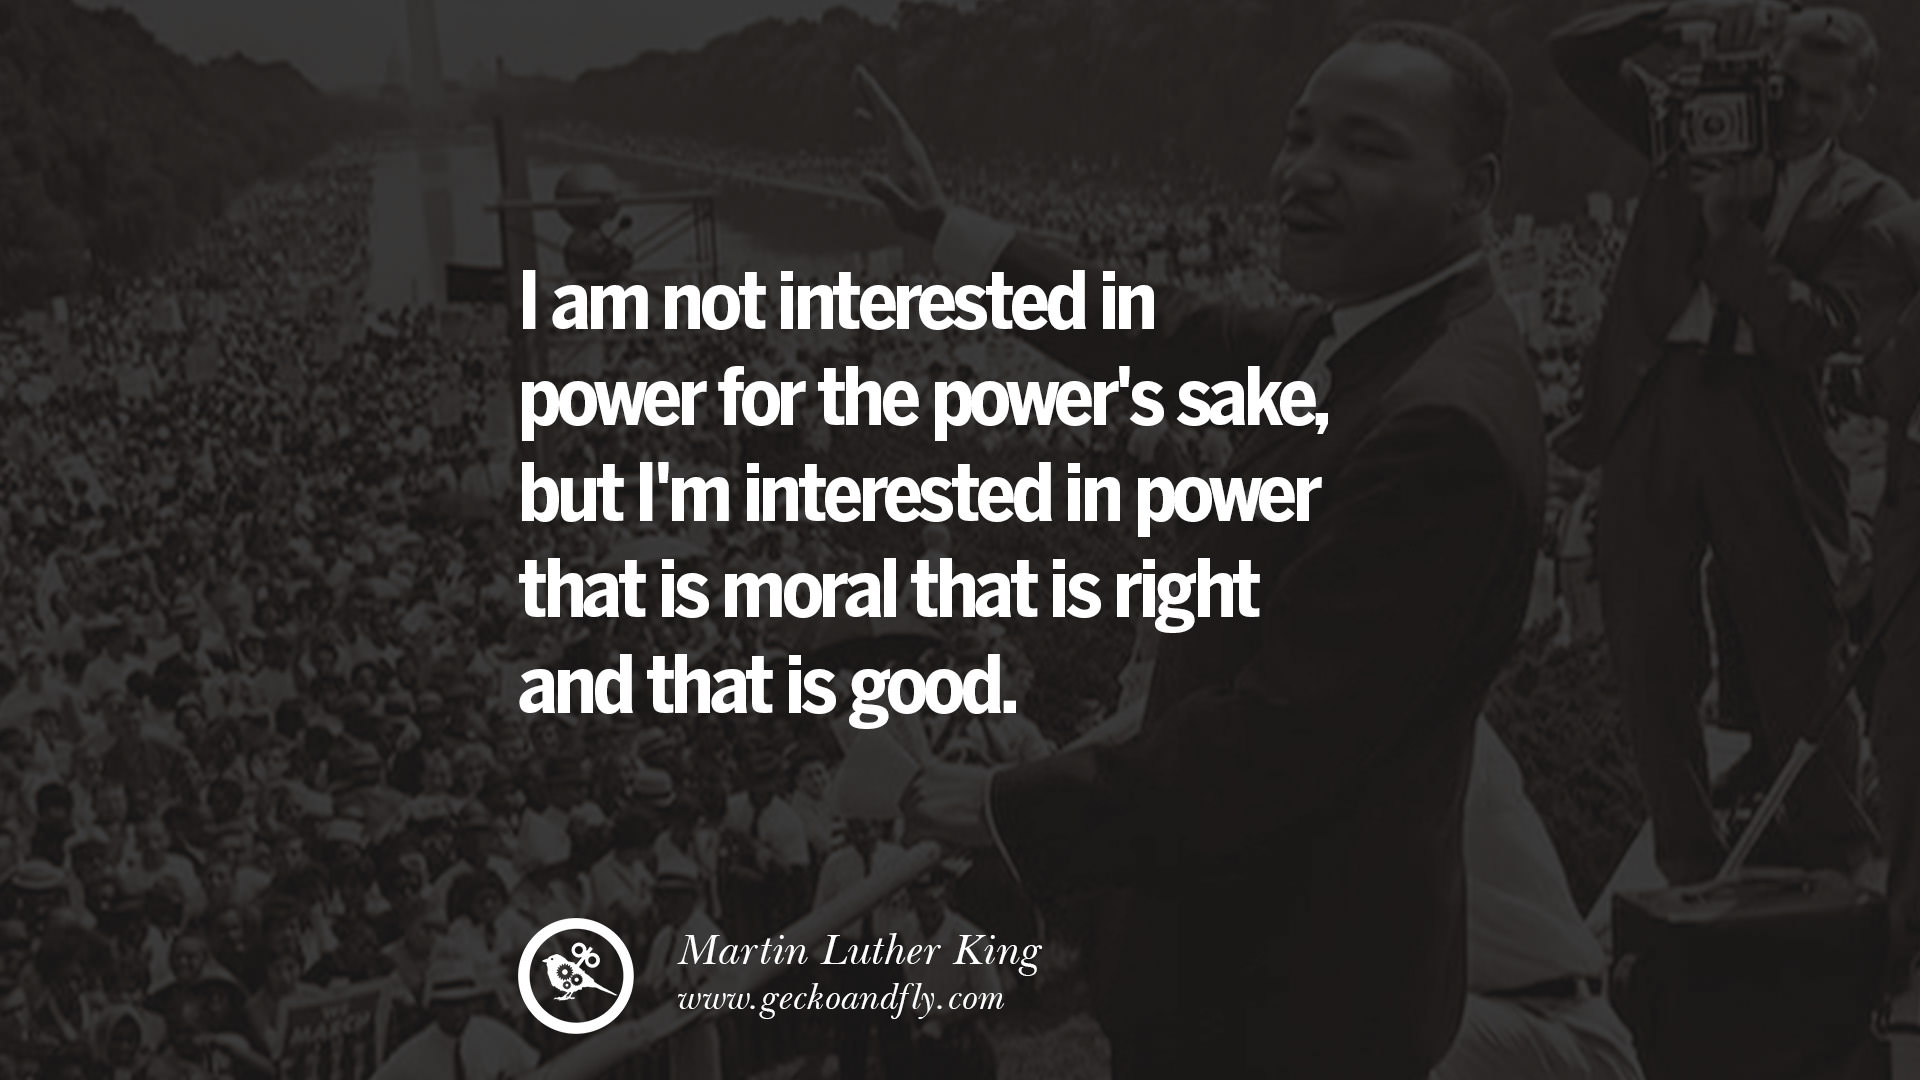 30 Powerful Martin Luther King Jr Quotes on Equality Rights, Black Lives Matter and More1920 x 1080